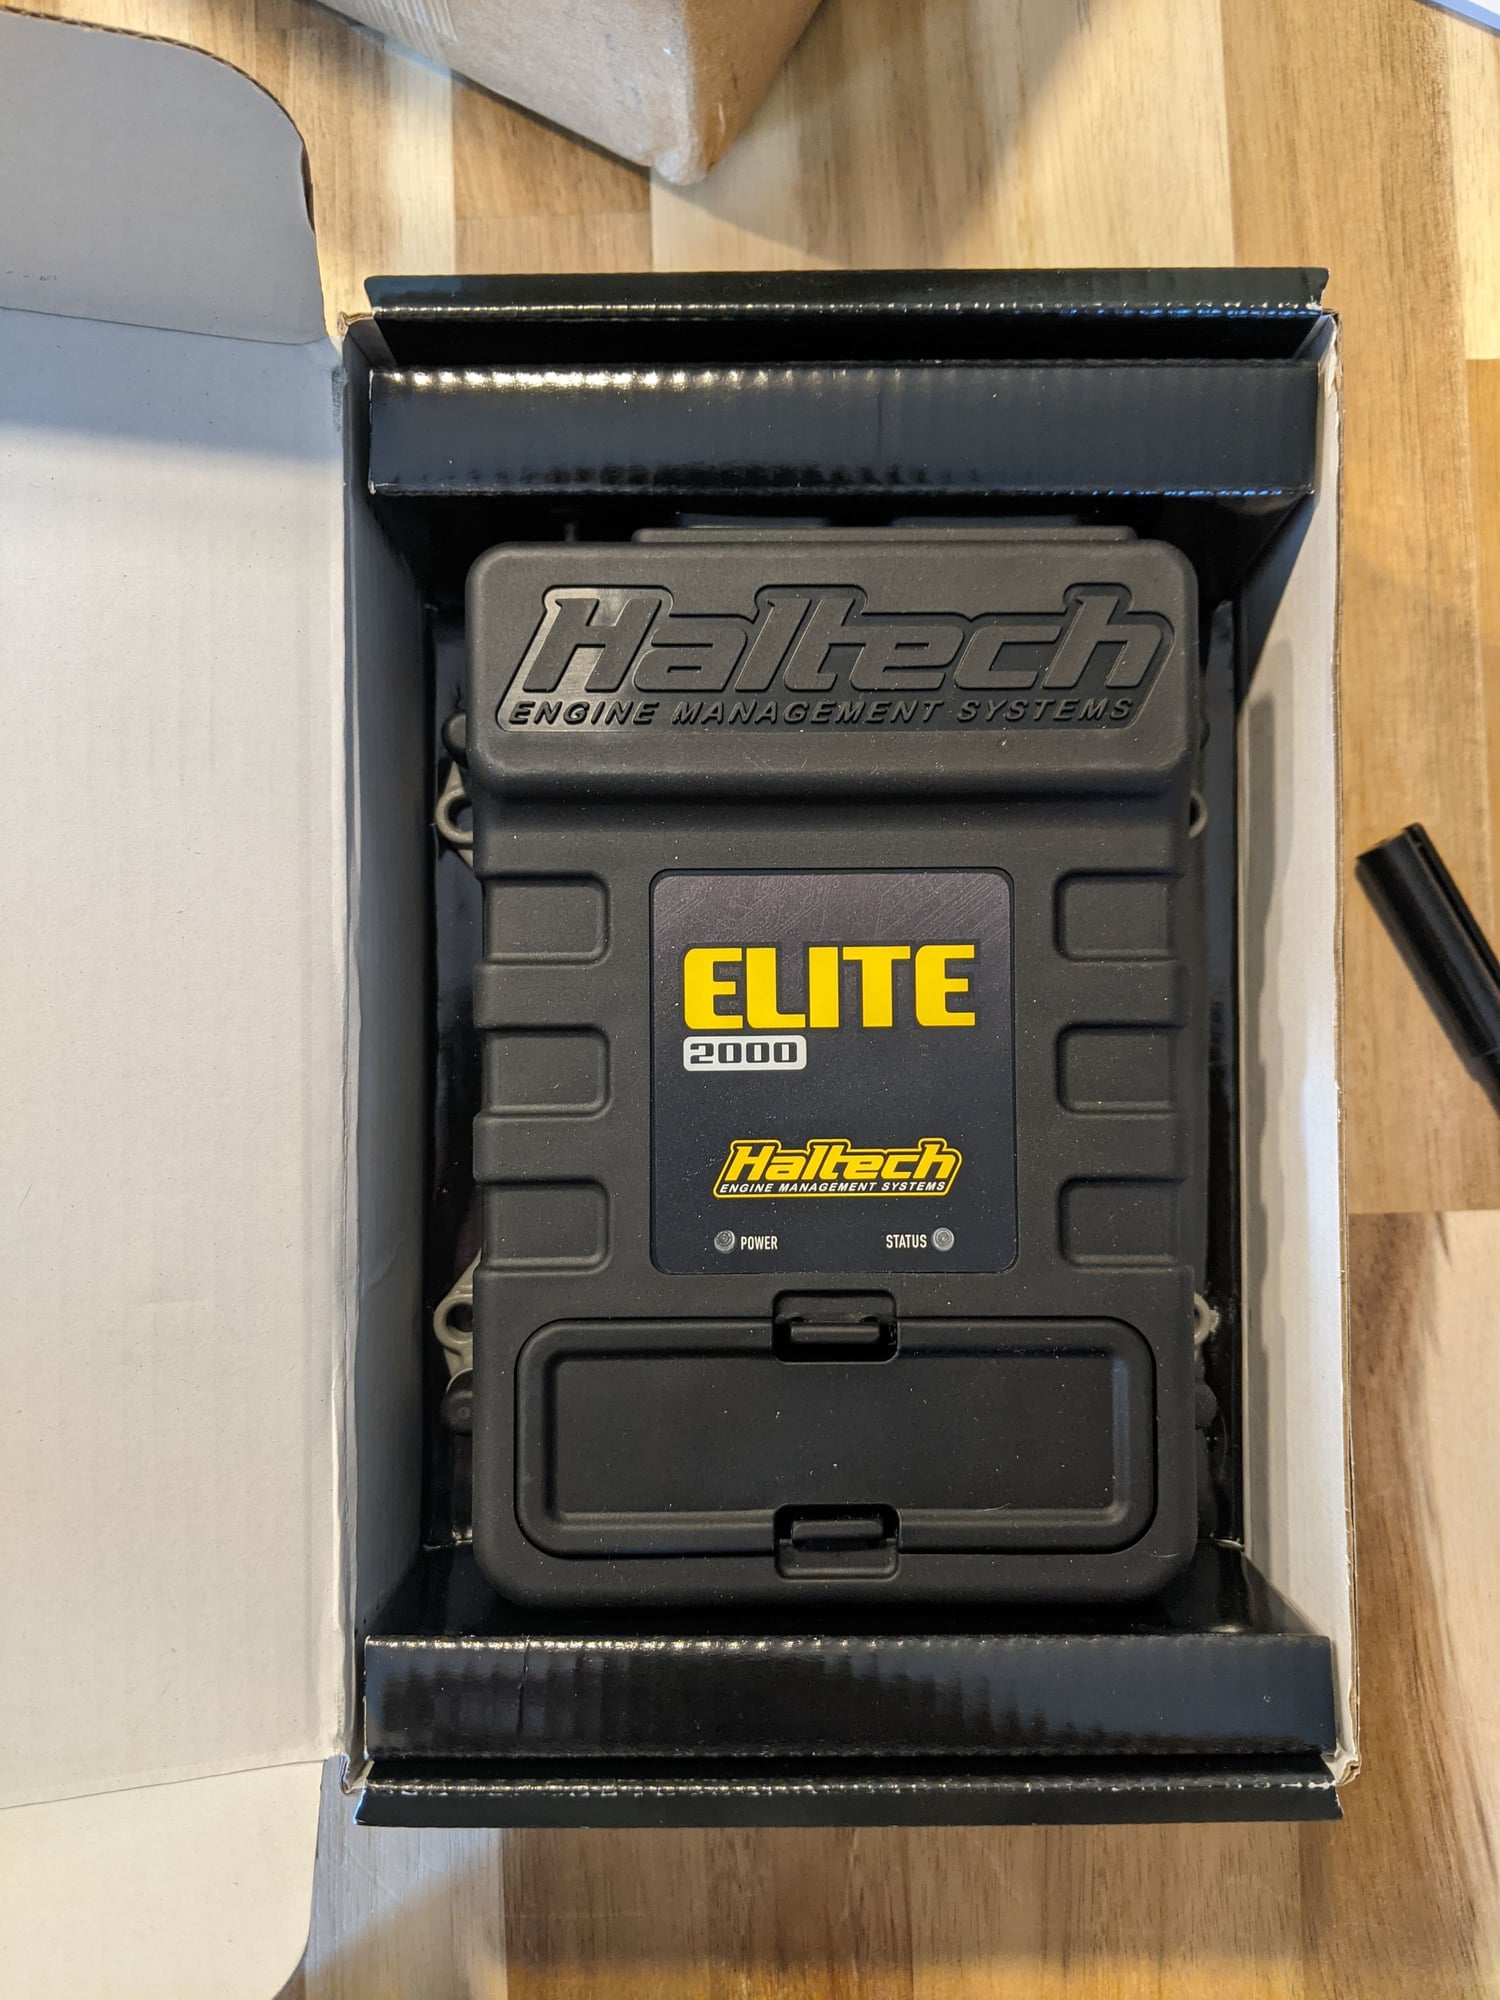 Engine - Electrical - Never Used Haltech Elite 2000 - New - 0  All Models - Waterford Township, MI 48329, United States